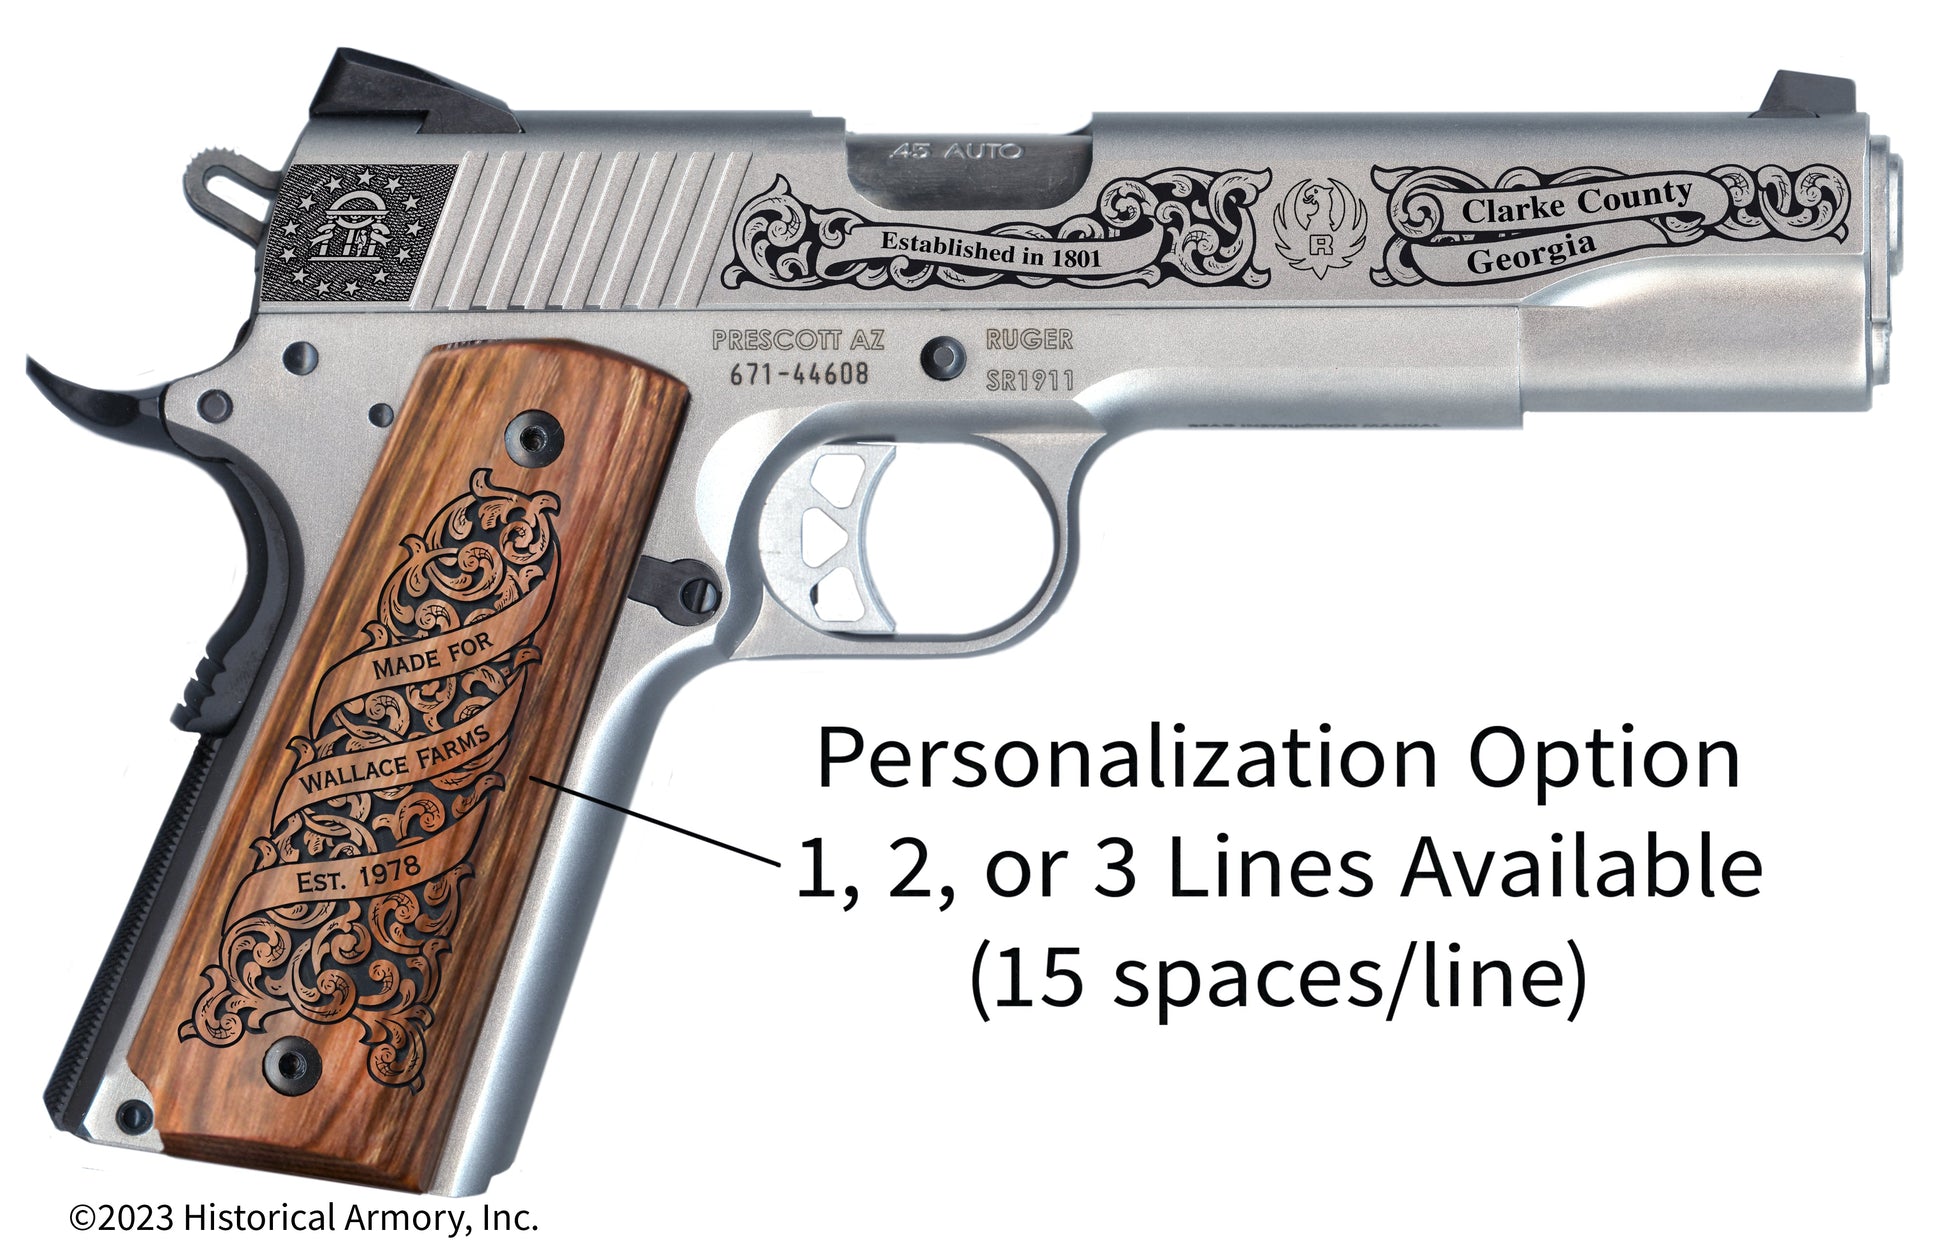 Clarke County Georgia Personalized Engraved .45 Auto Ruger 1911